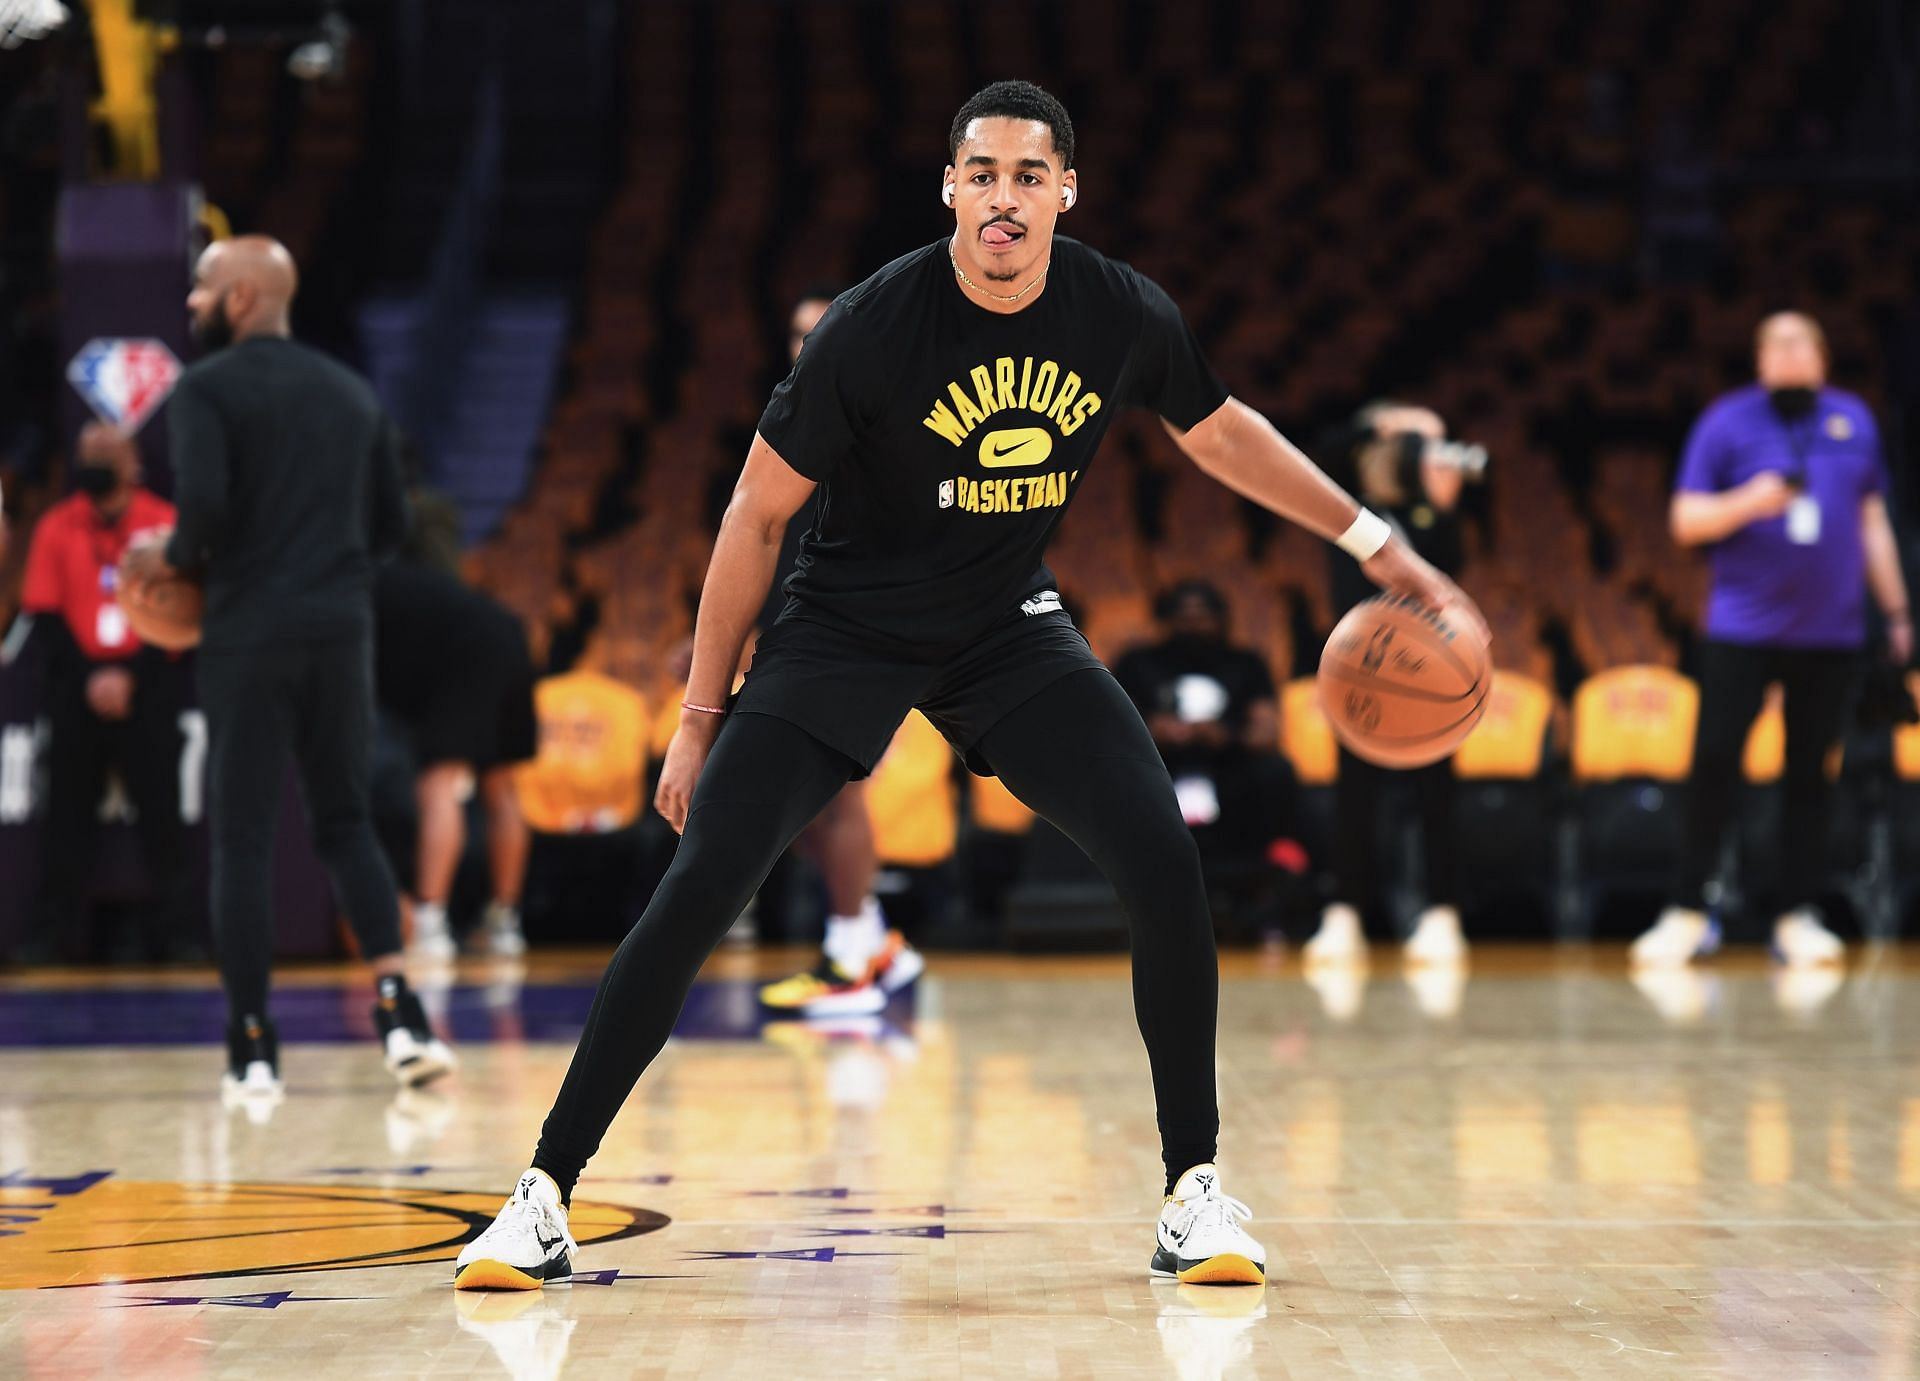 Jordan Poole #3 of the Golden State Warriors shoots warm ups prior to the season opener against Los Angeles Lakers at Staples Center on October 19, 2021 in Los Angeles, California.